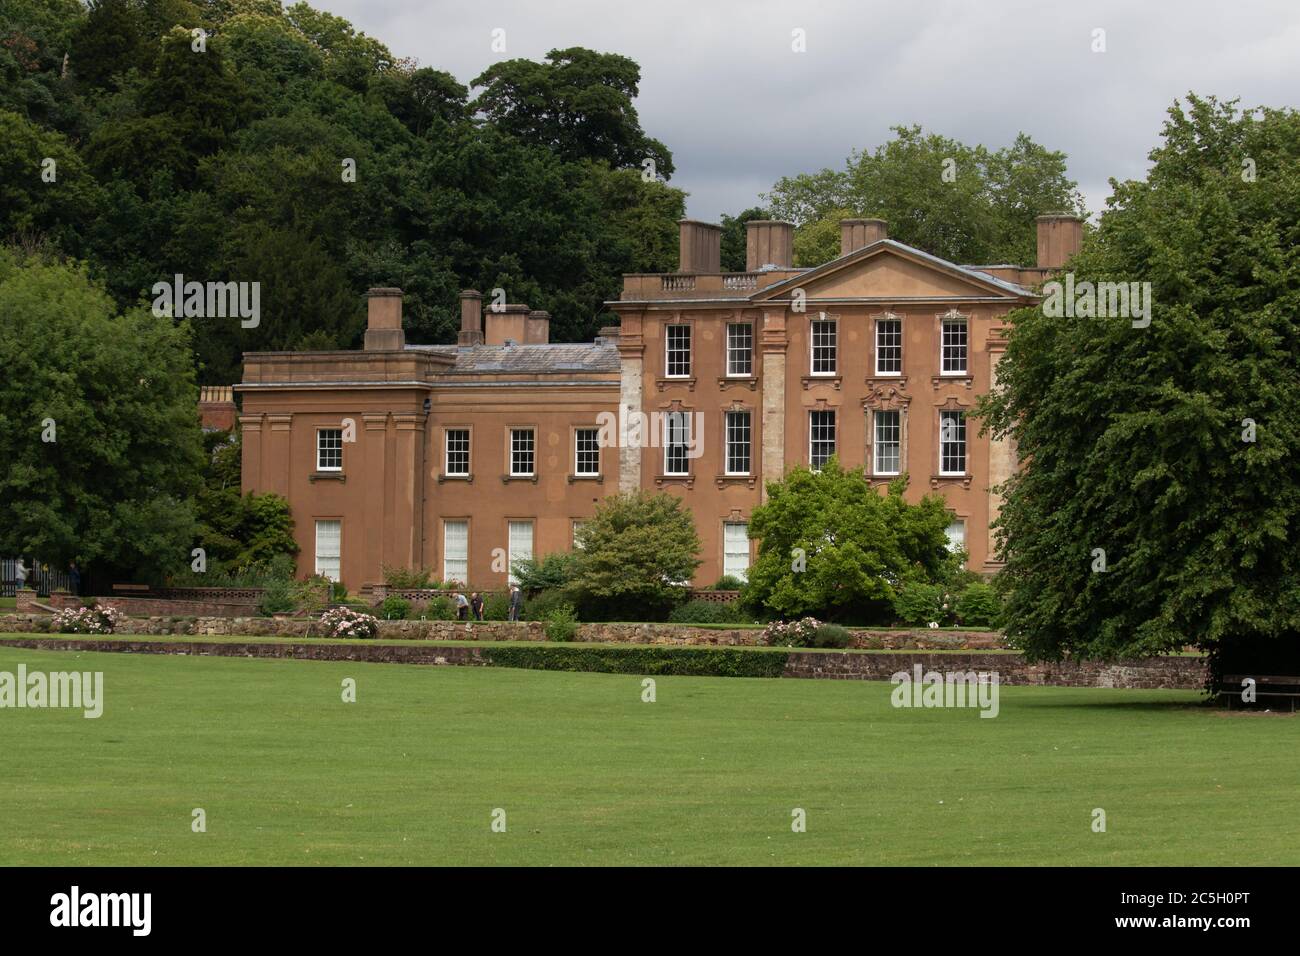 Himley Hall with croquet players on lawn. Summer. July 2020. British Isles. Stock Photo